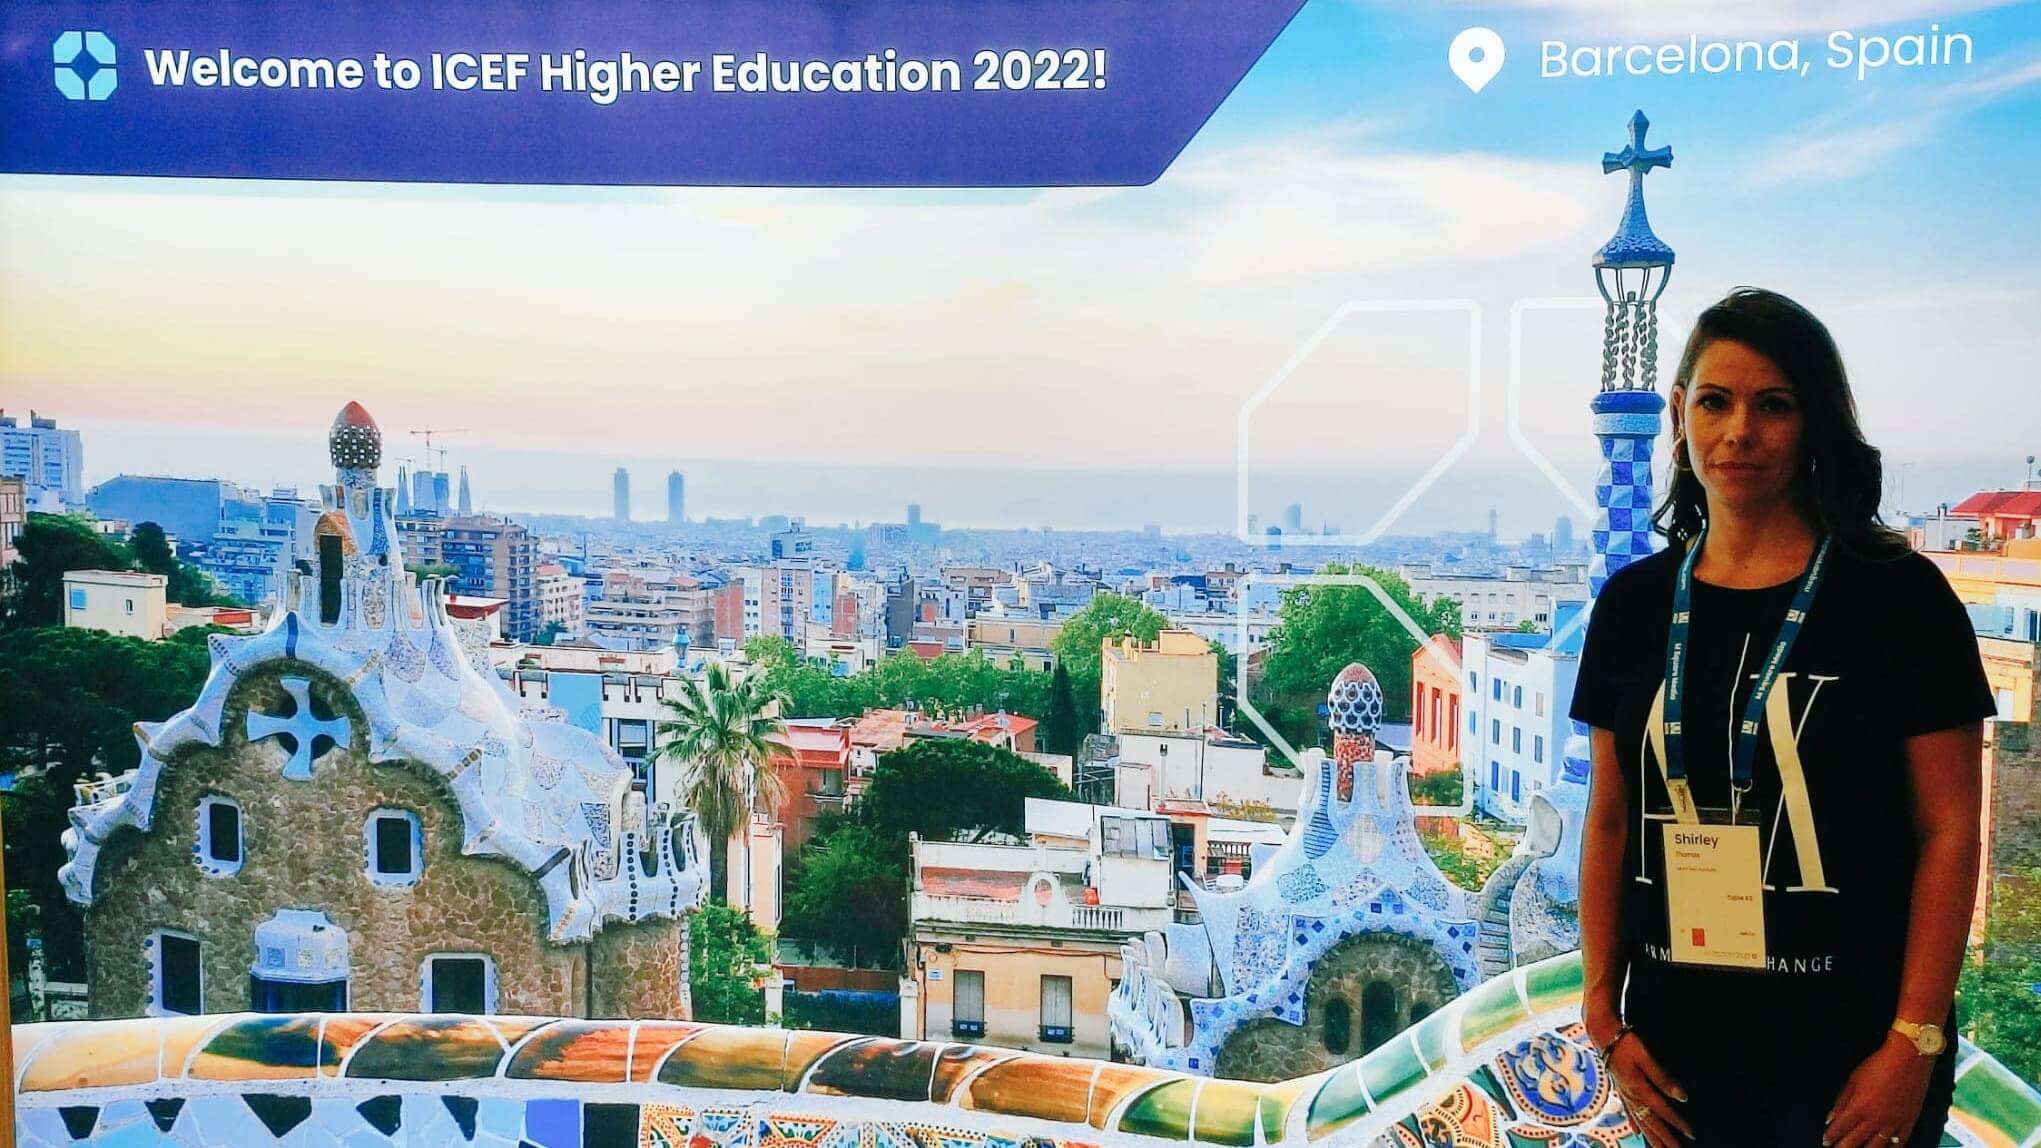 ICEF Higher Education Expo 2022